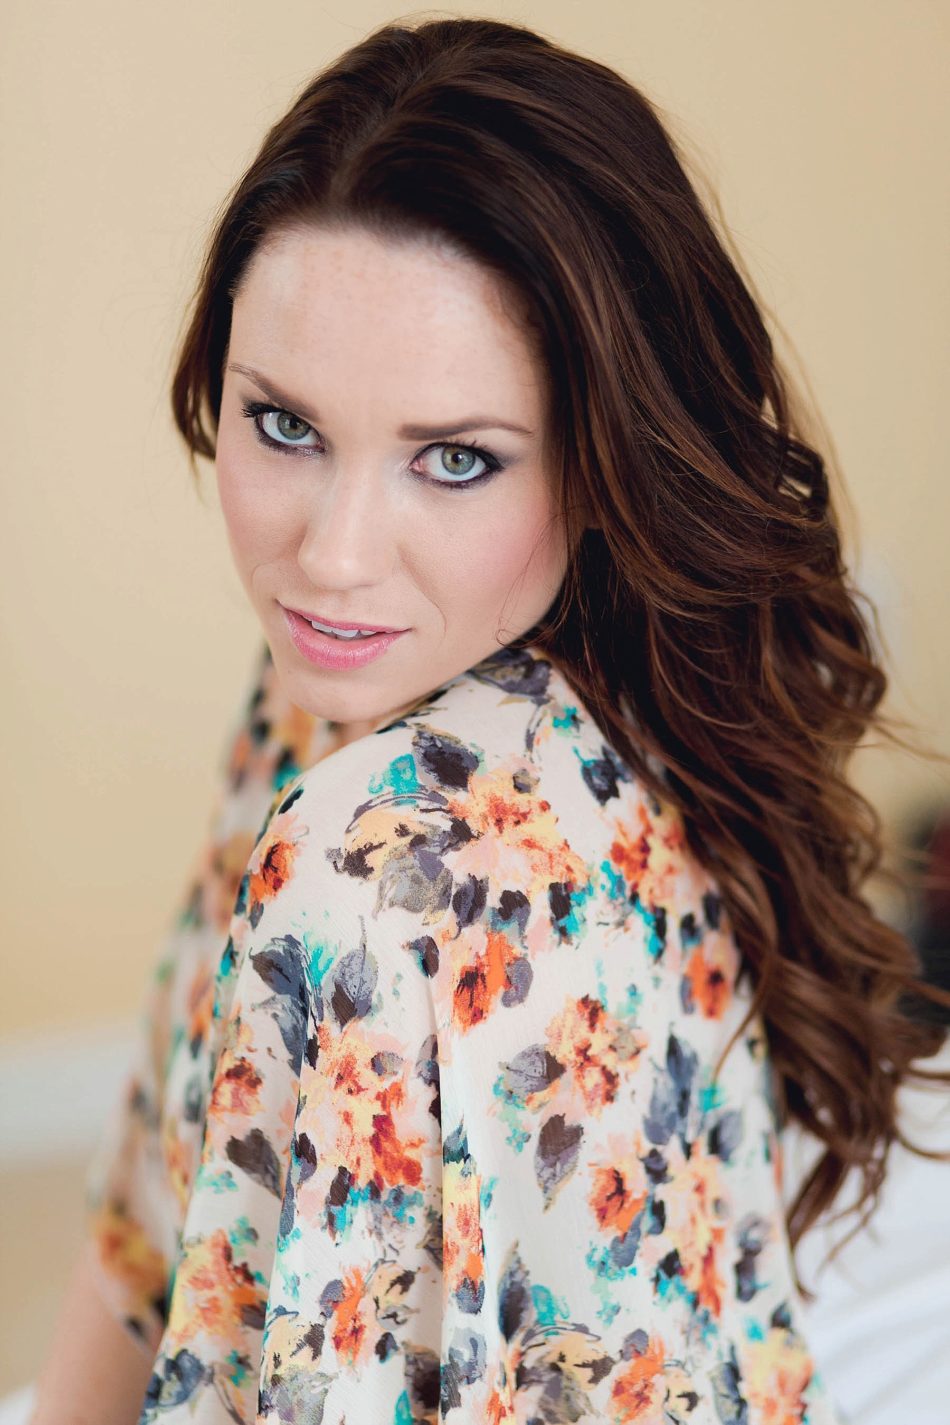 Ms L wears floral kimono over white lingerie in bed, Boudoir Photography, Charleston, SC Kate Timbers Photography. http://katetimbers.com #katetimbersphotography // Charleston Photography // Inspiration